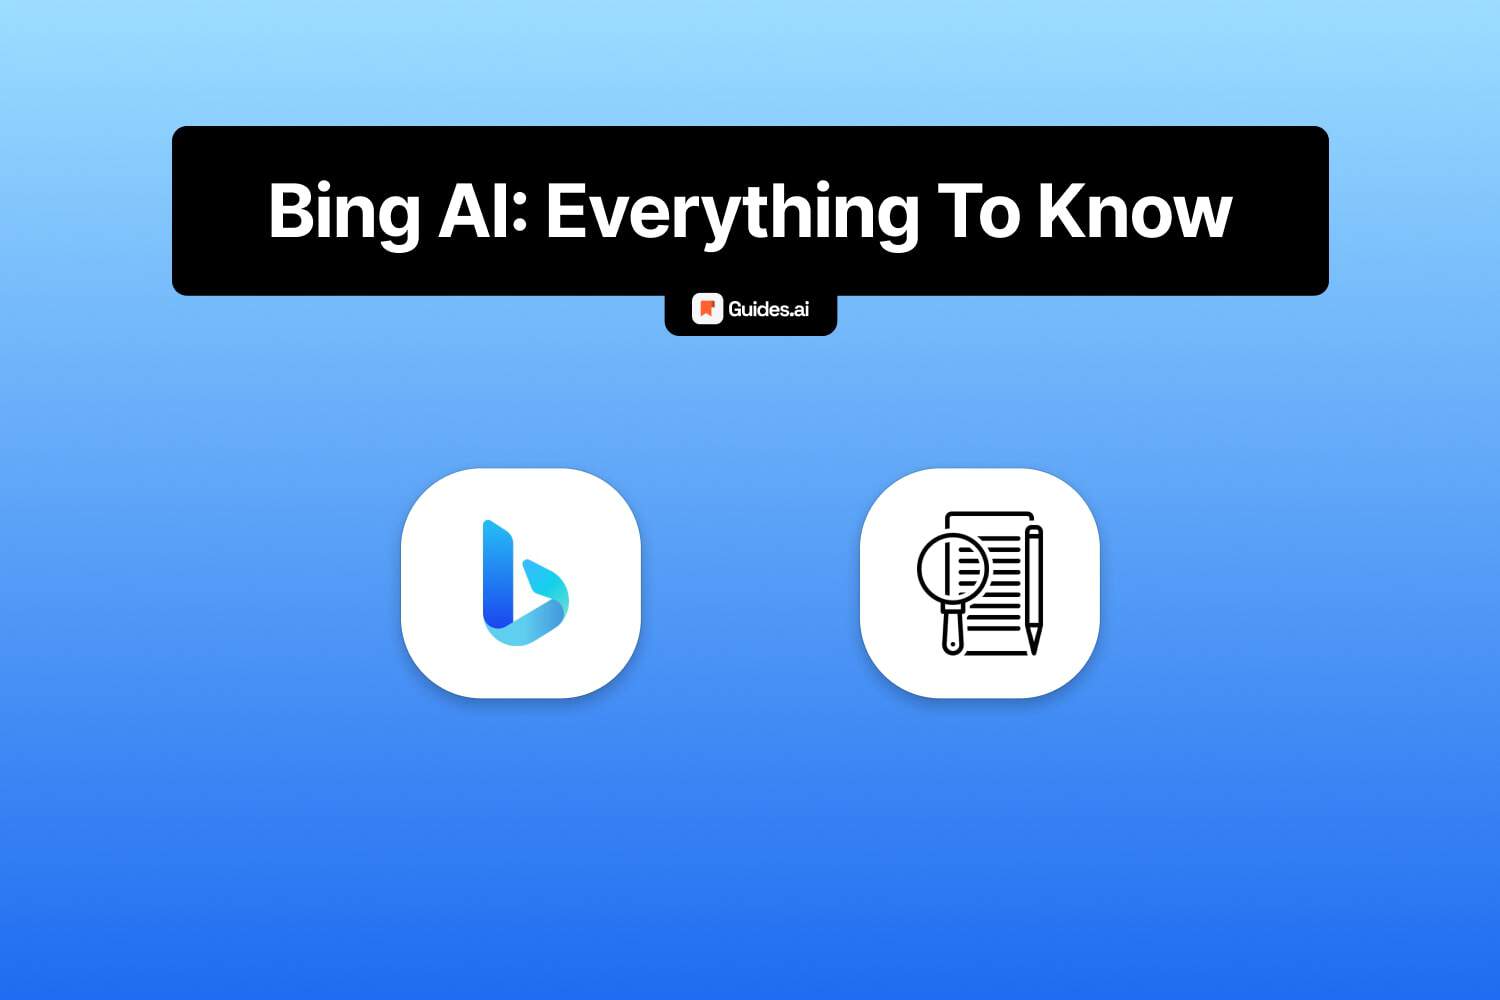 All about Bing AI